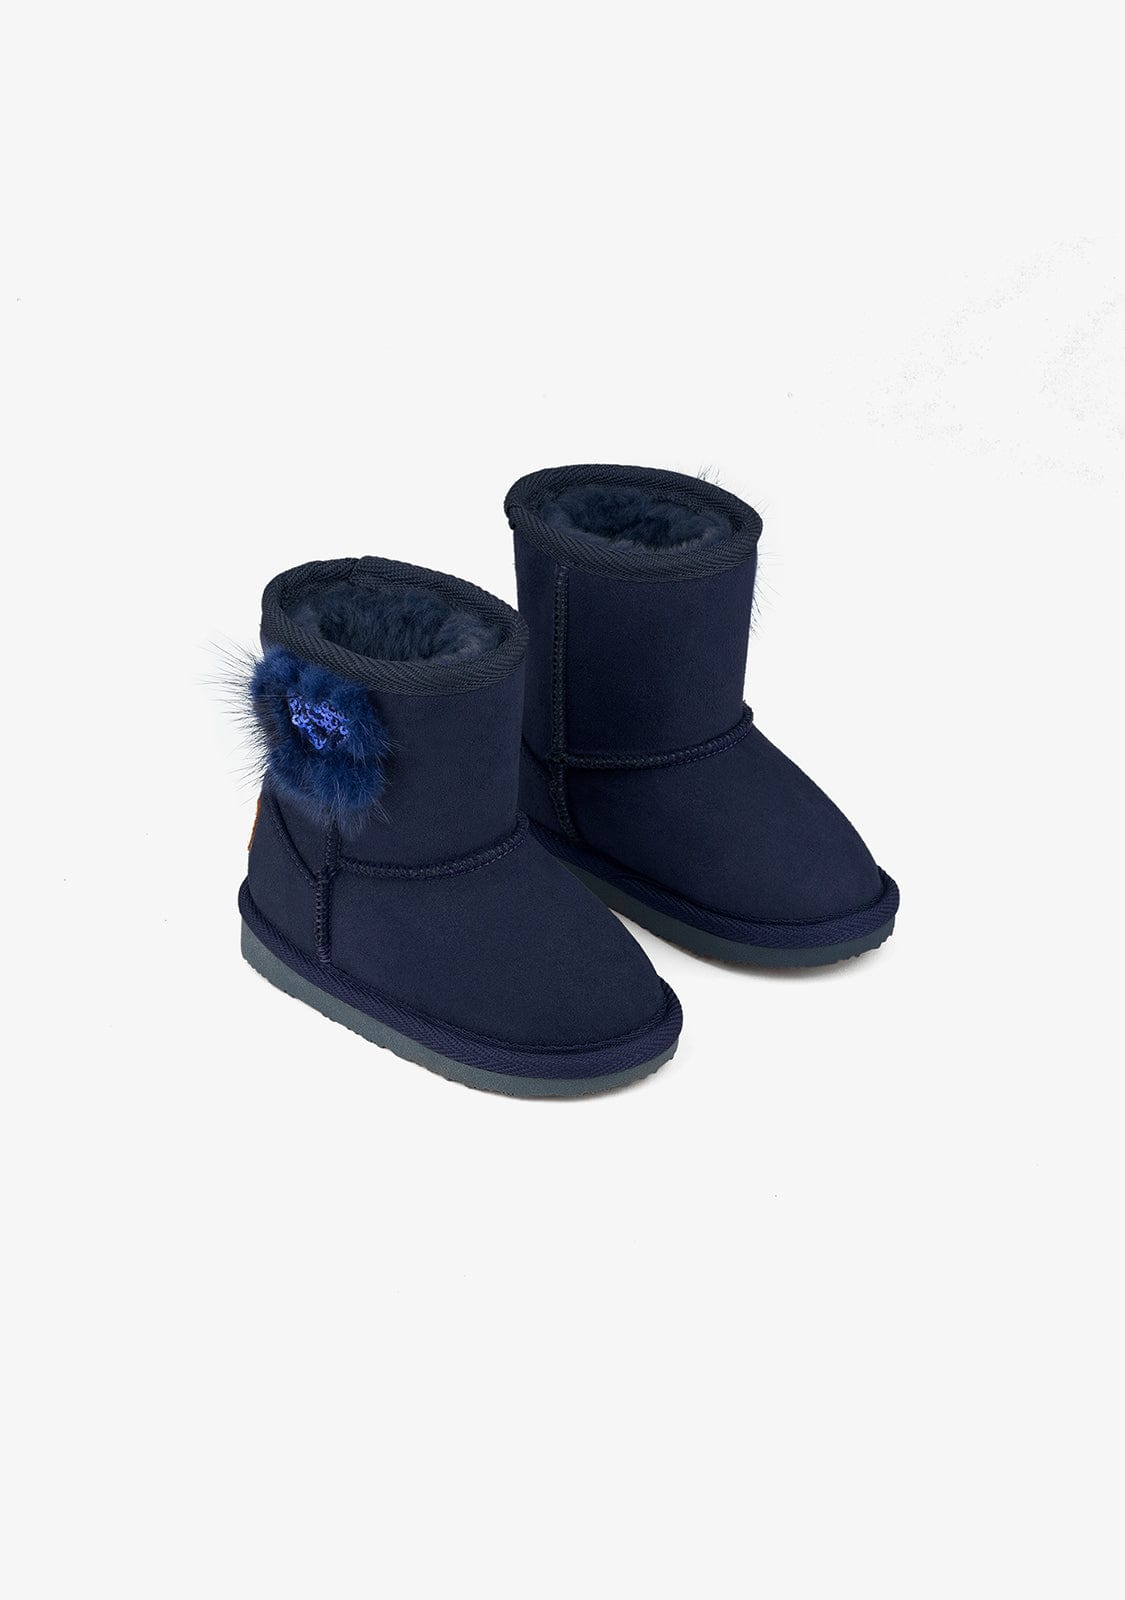 OSITO Shoes Baby's Navy Heart Sequins Australian Boots